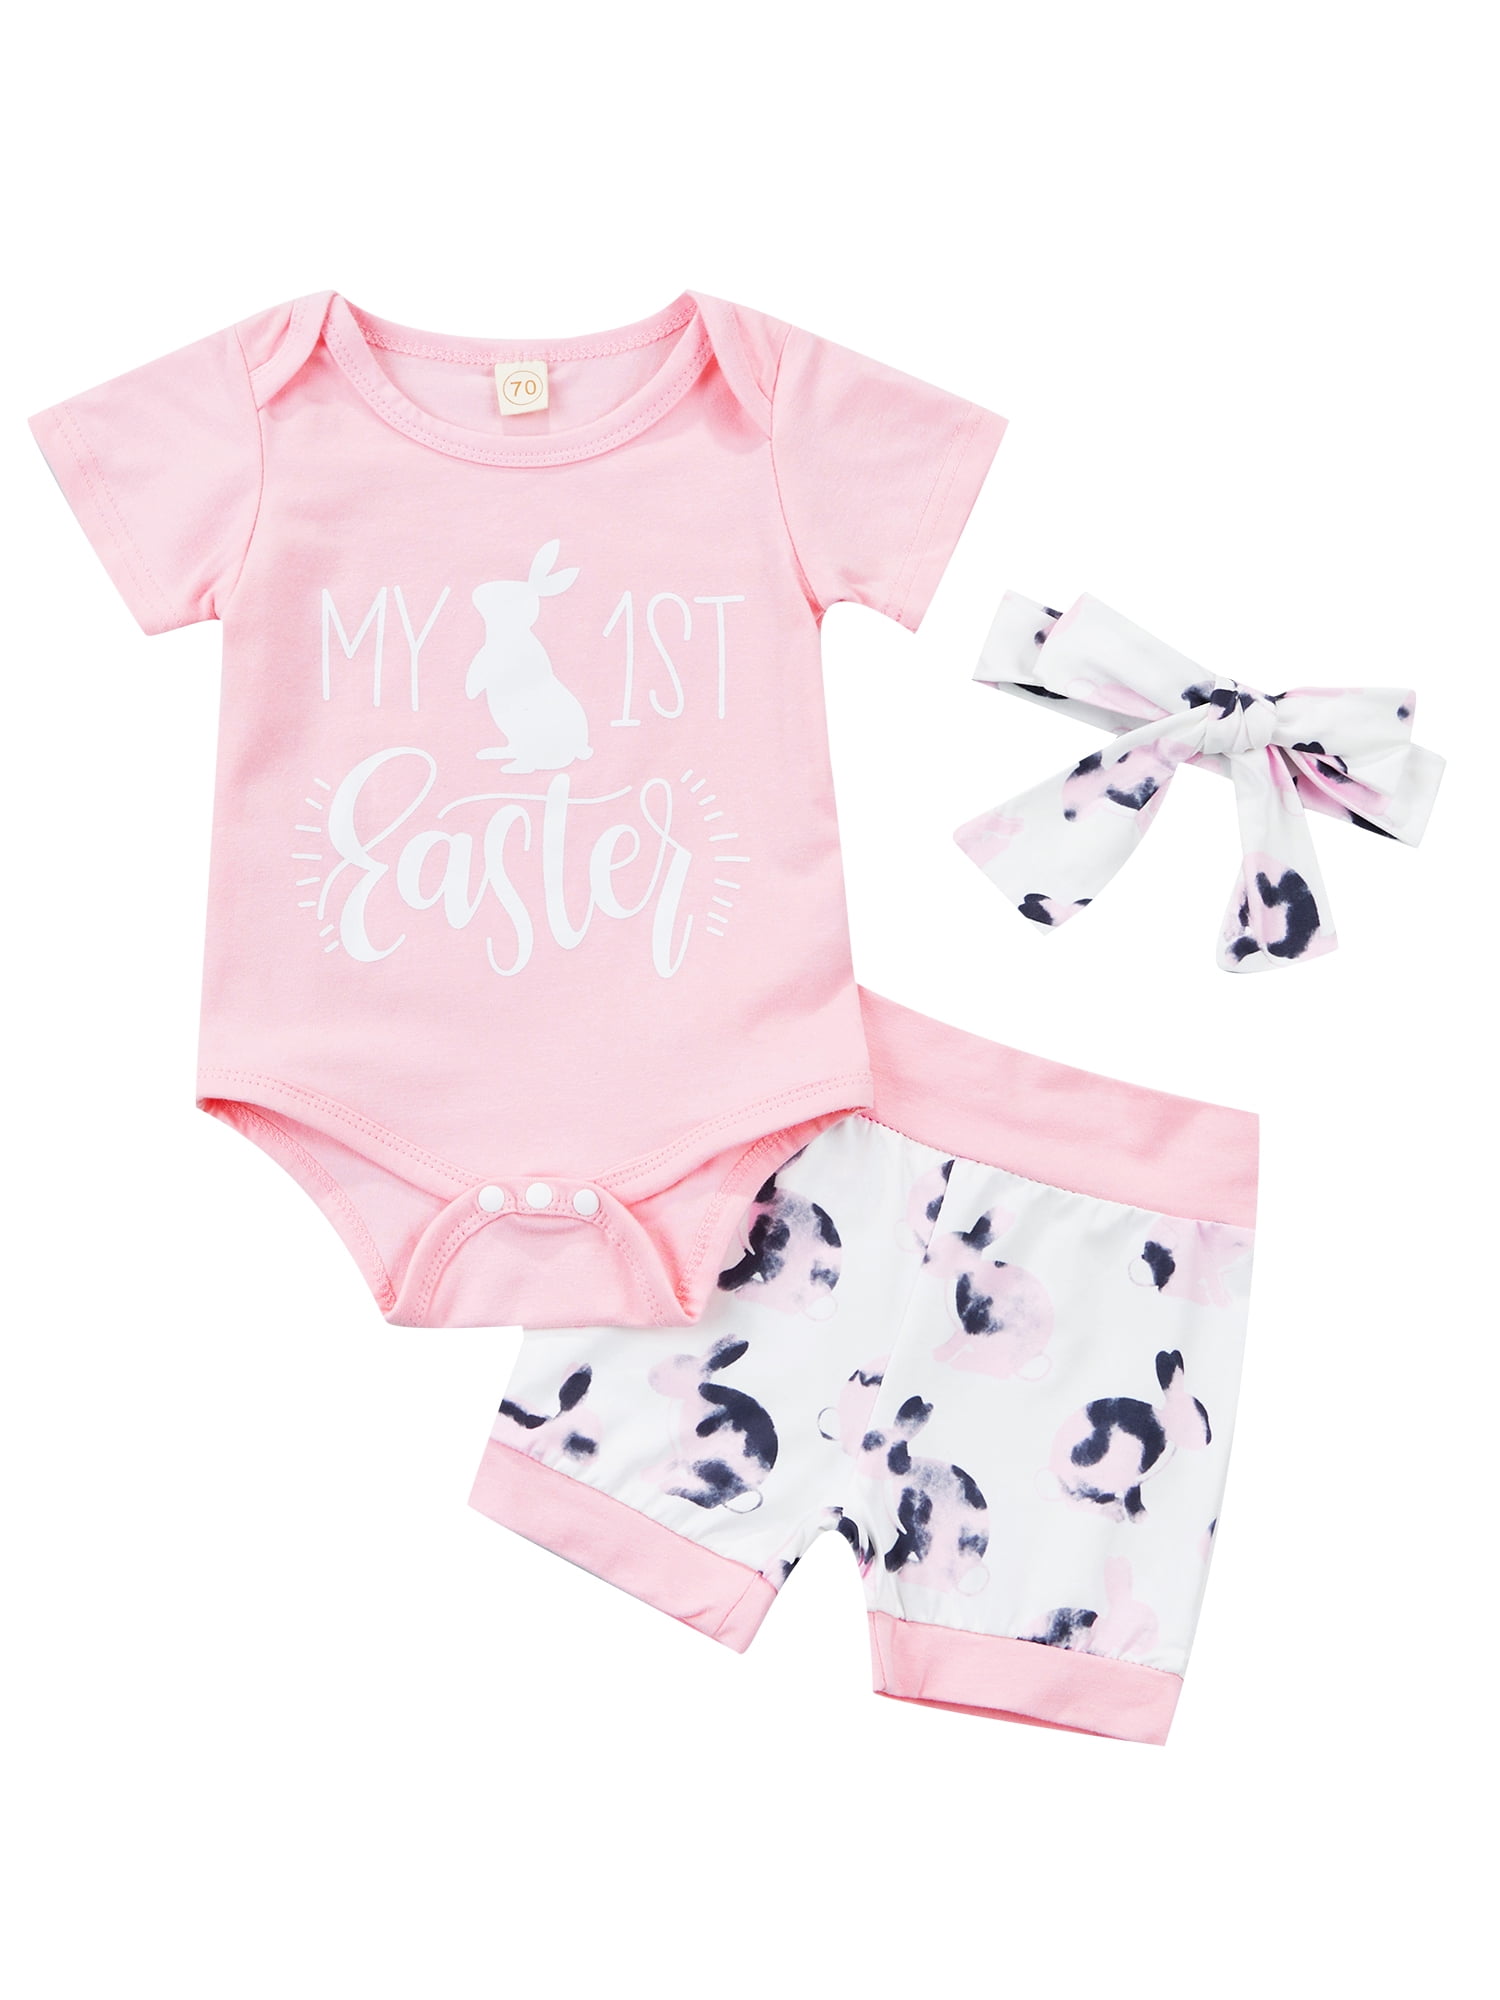 US Newborn Infant Baby Girl Clothes Short Sleeve Romper Shorts Casual Outfit Set 